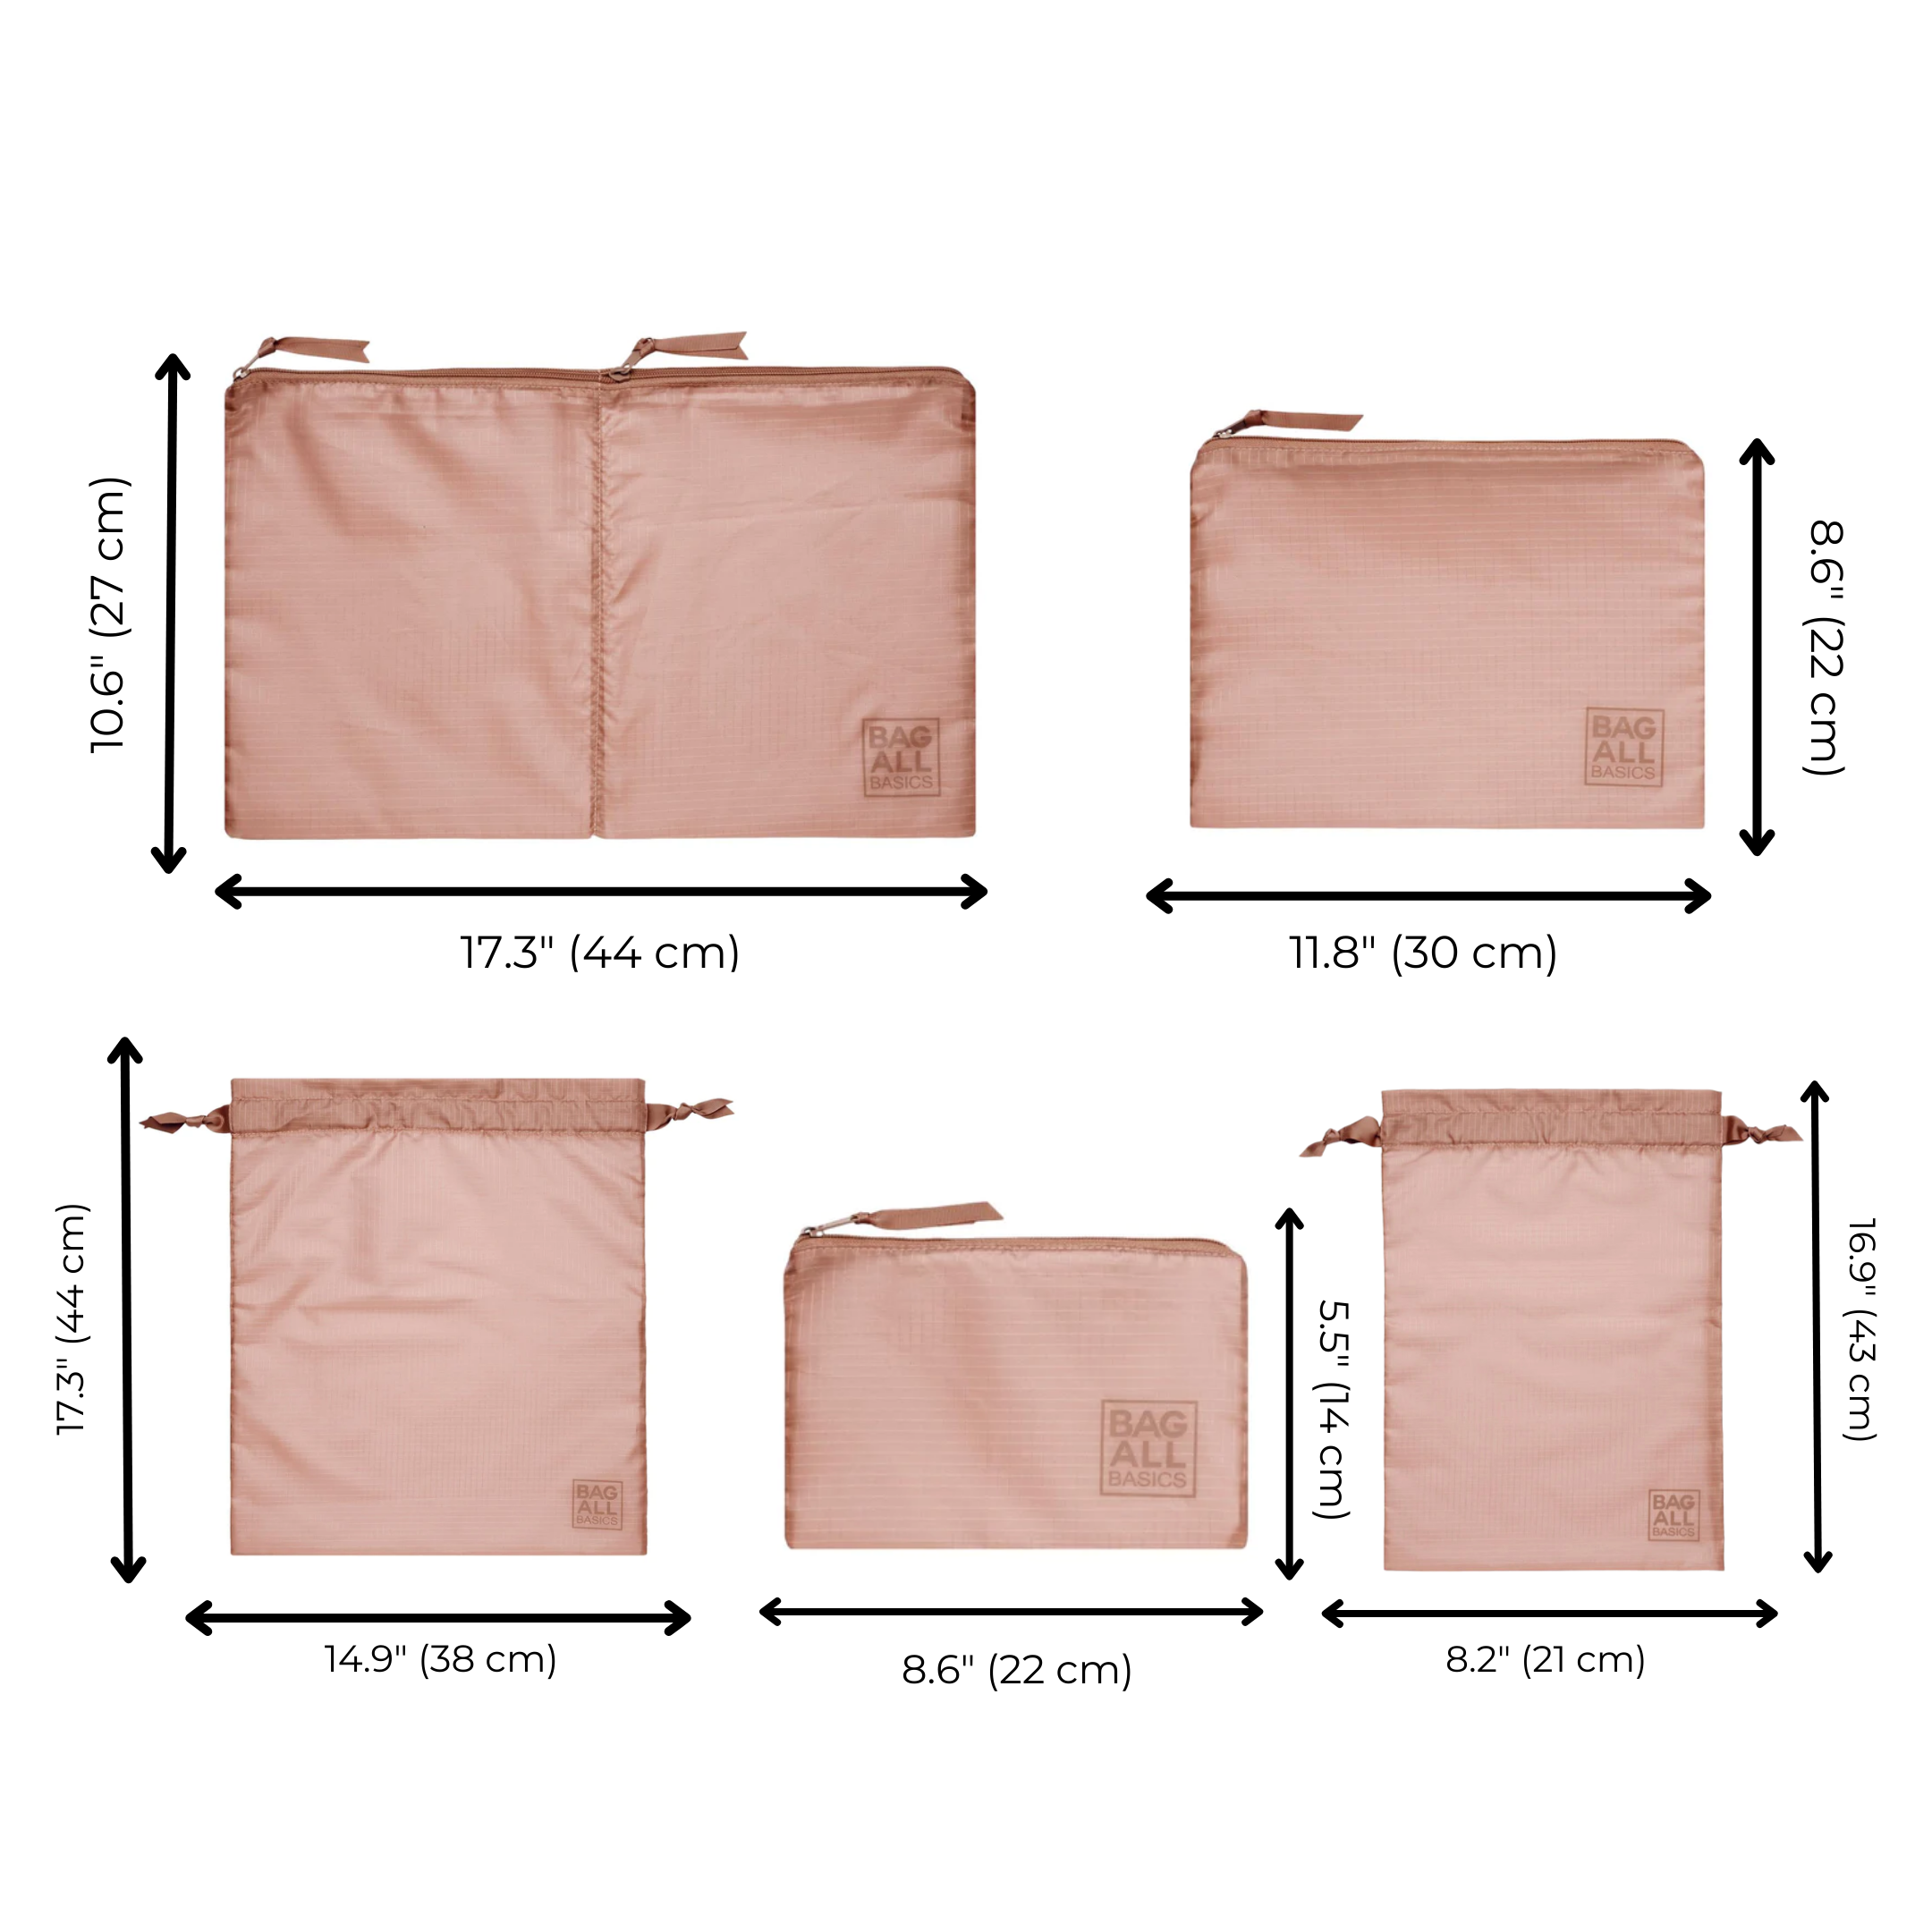 Packing Bags Set in Recycled Nylon, 5-pack, Pink/Blush | Bag-all